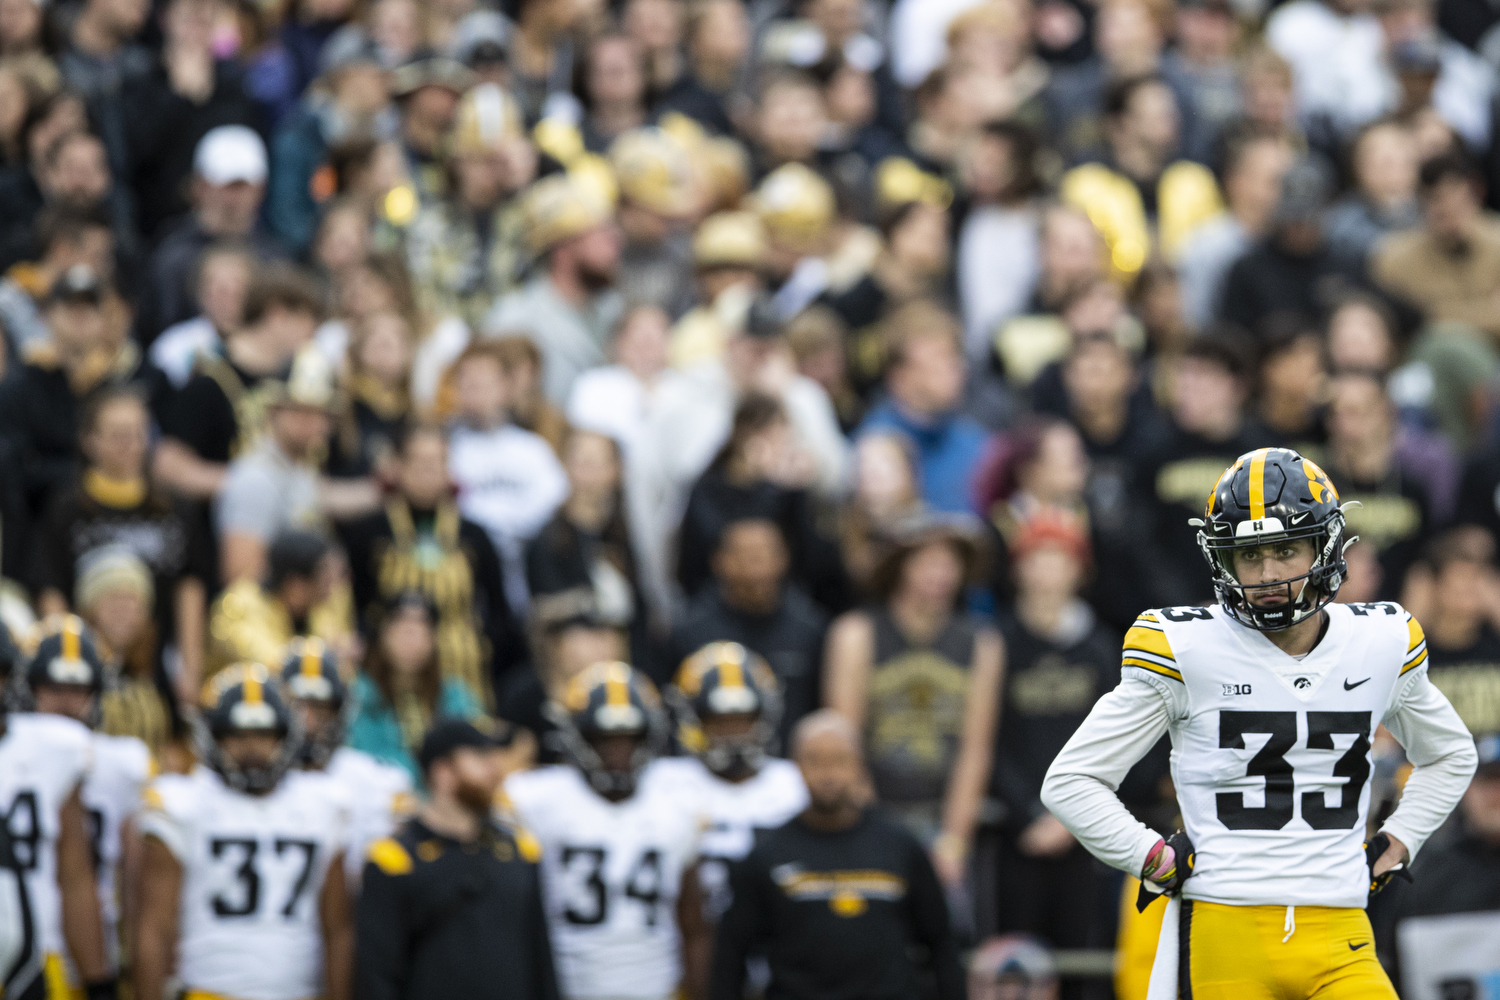 Twitter reacts to Iowa football's victory over Purdue The Daily Iowan